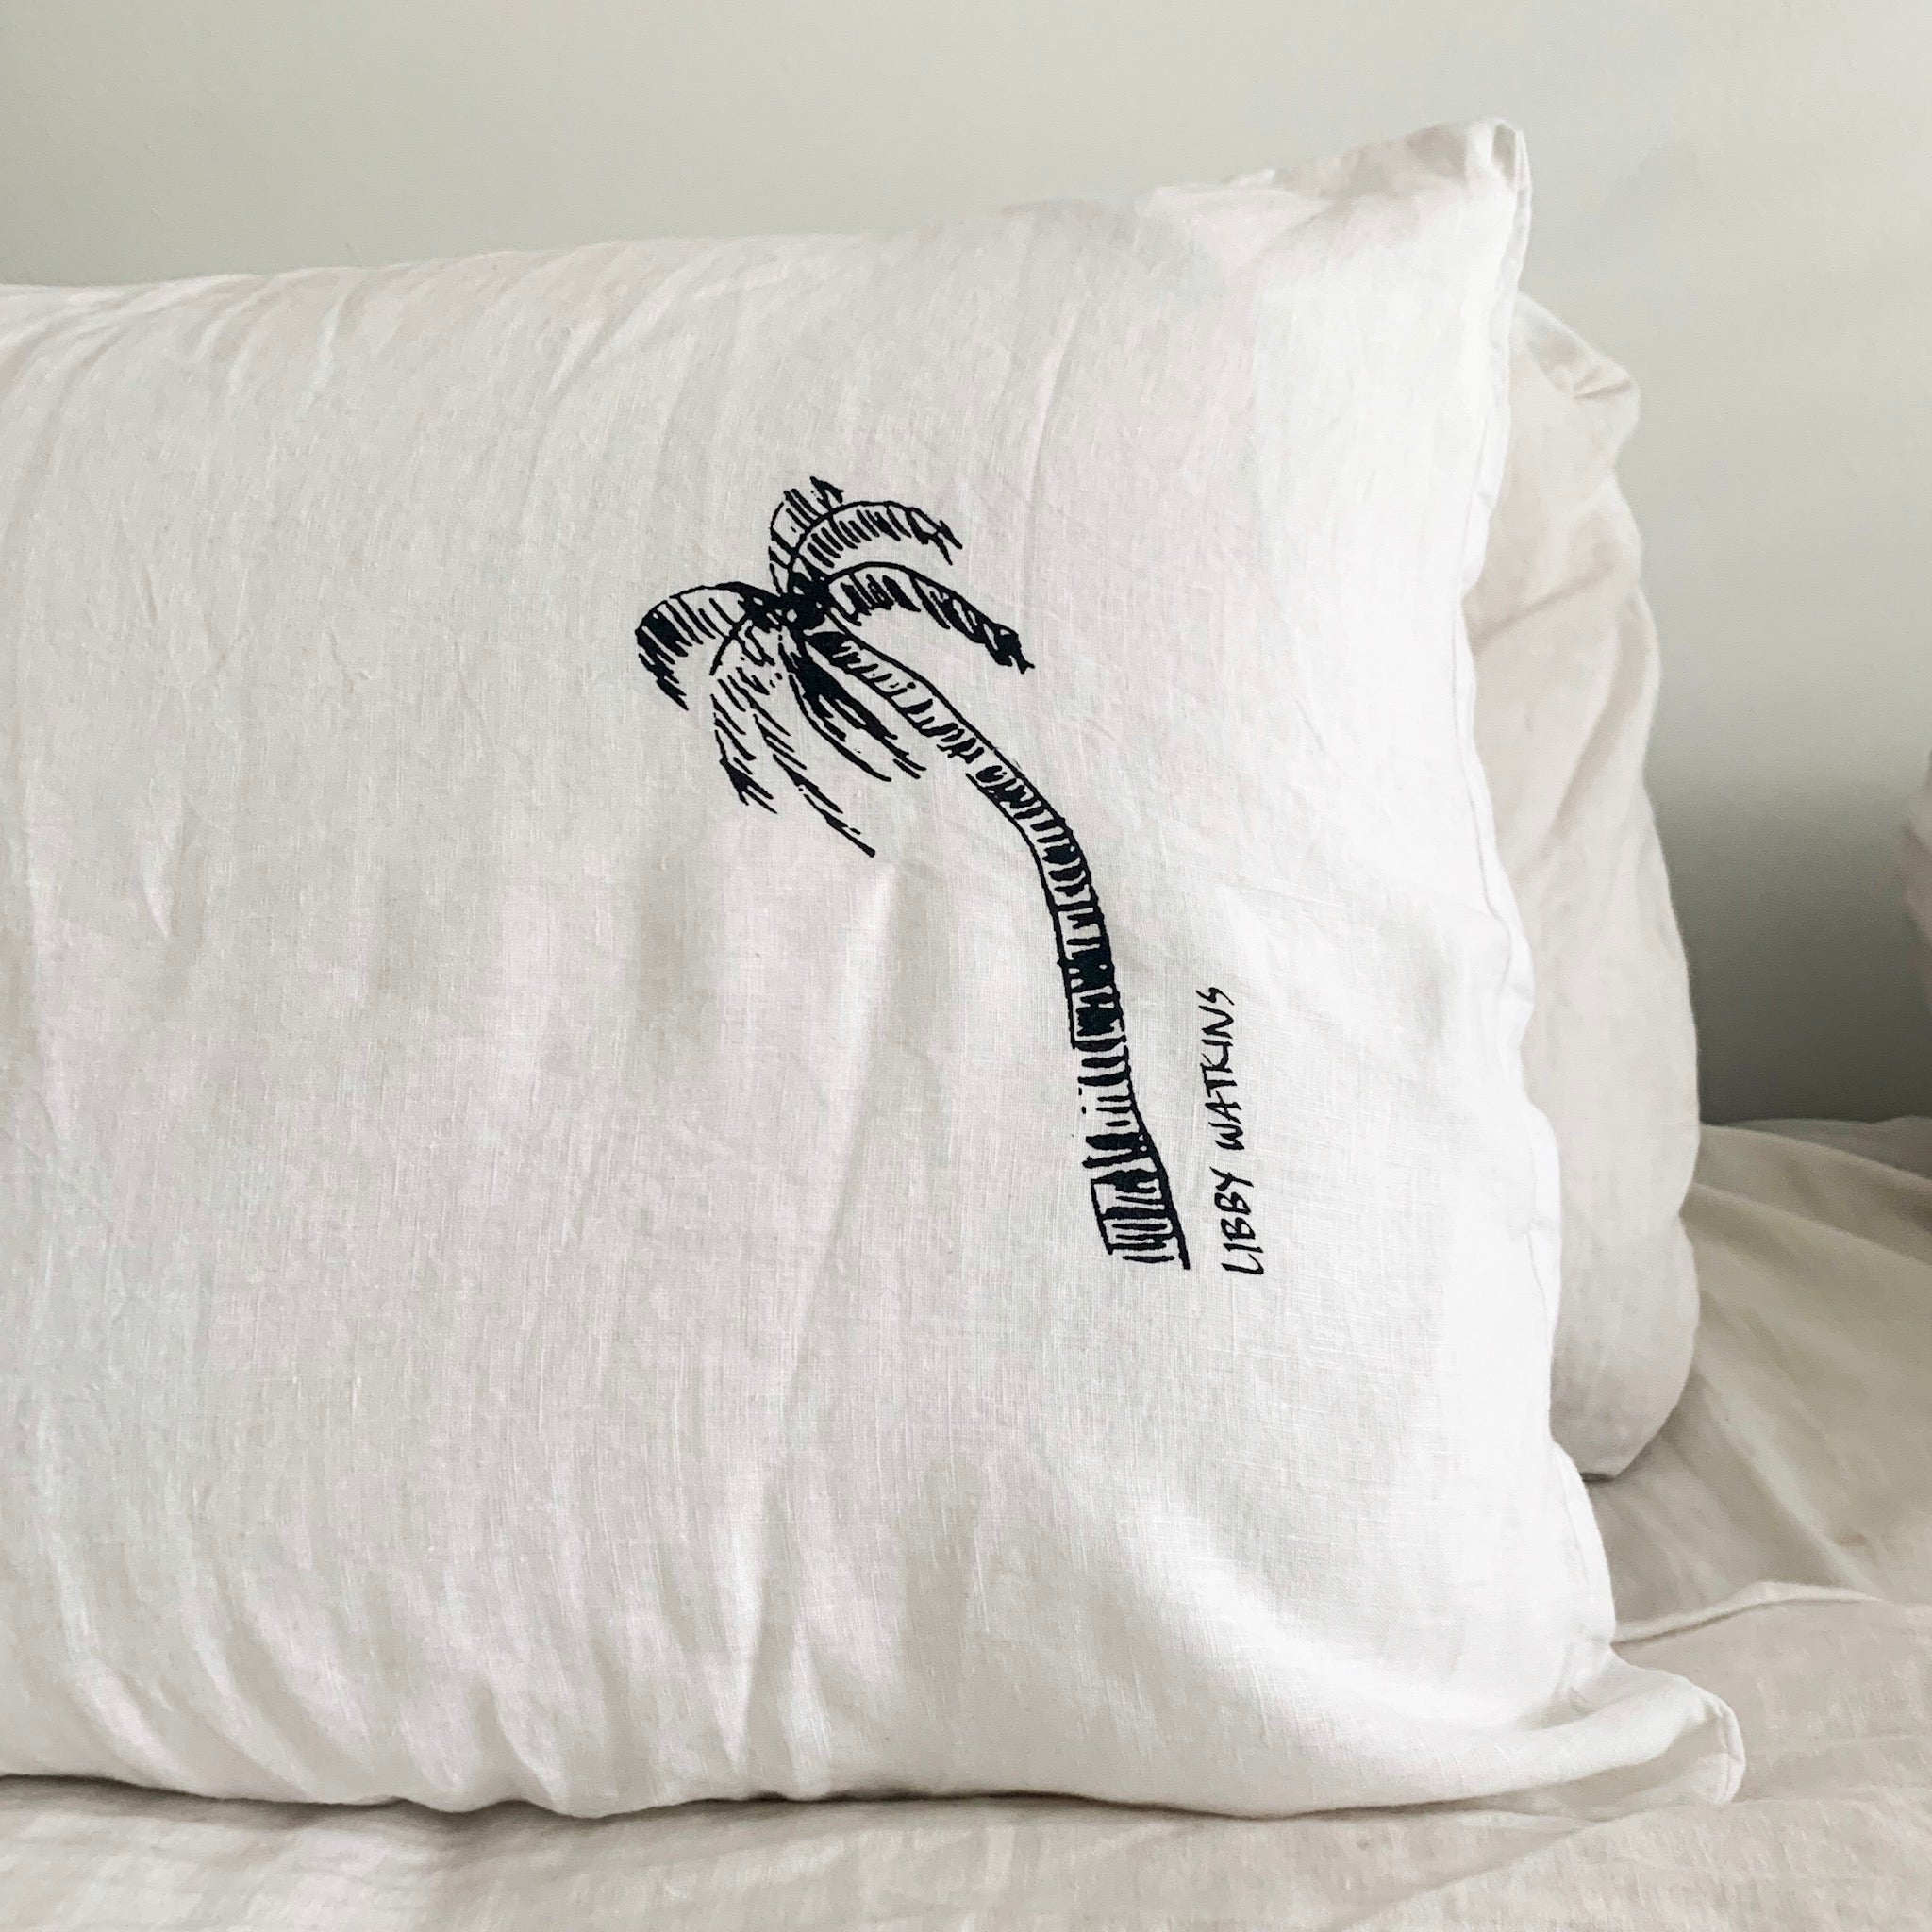 Signature Single Ink Palm Pillow Cases